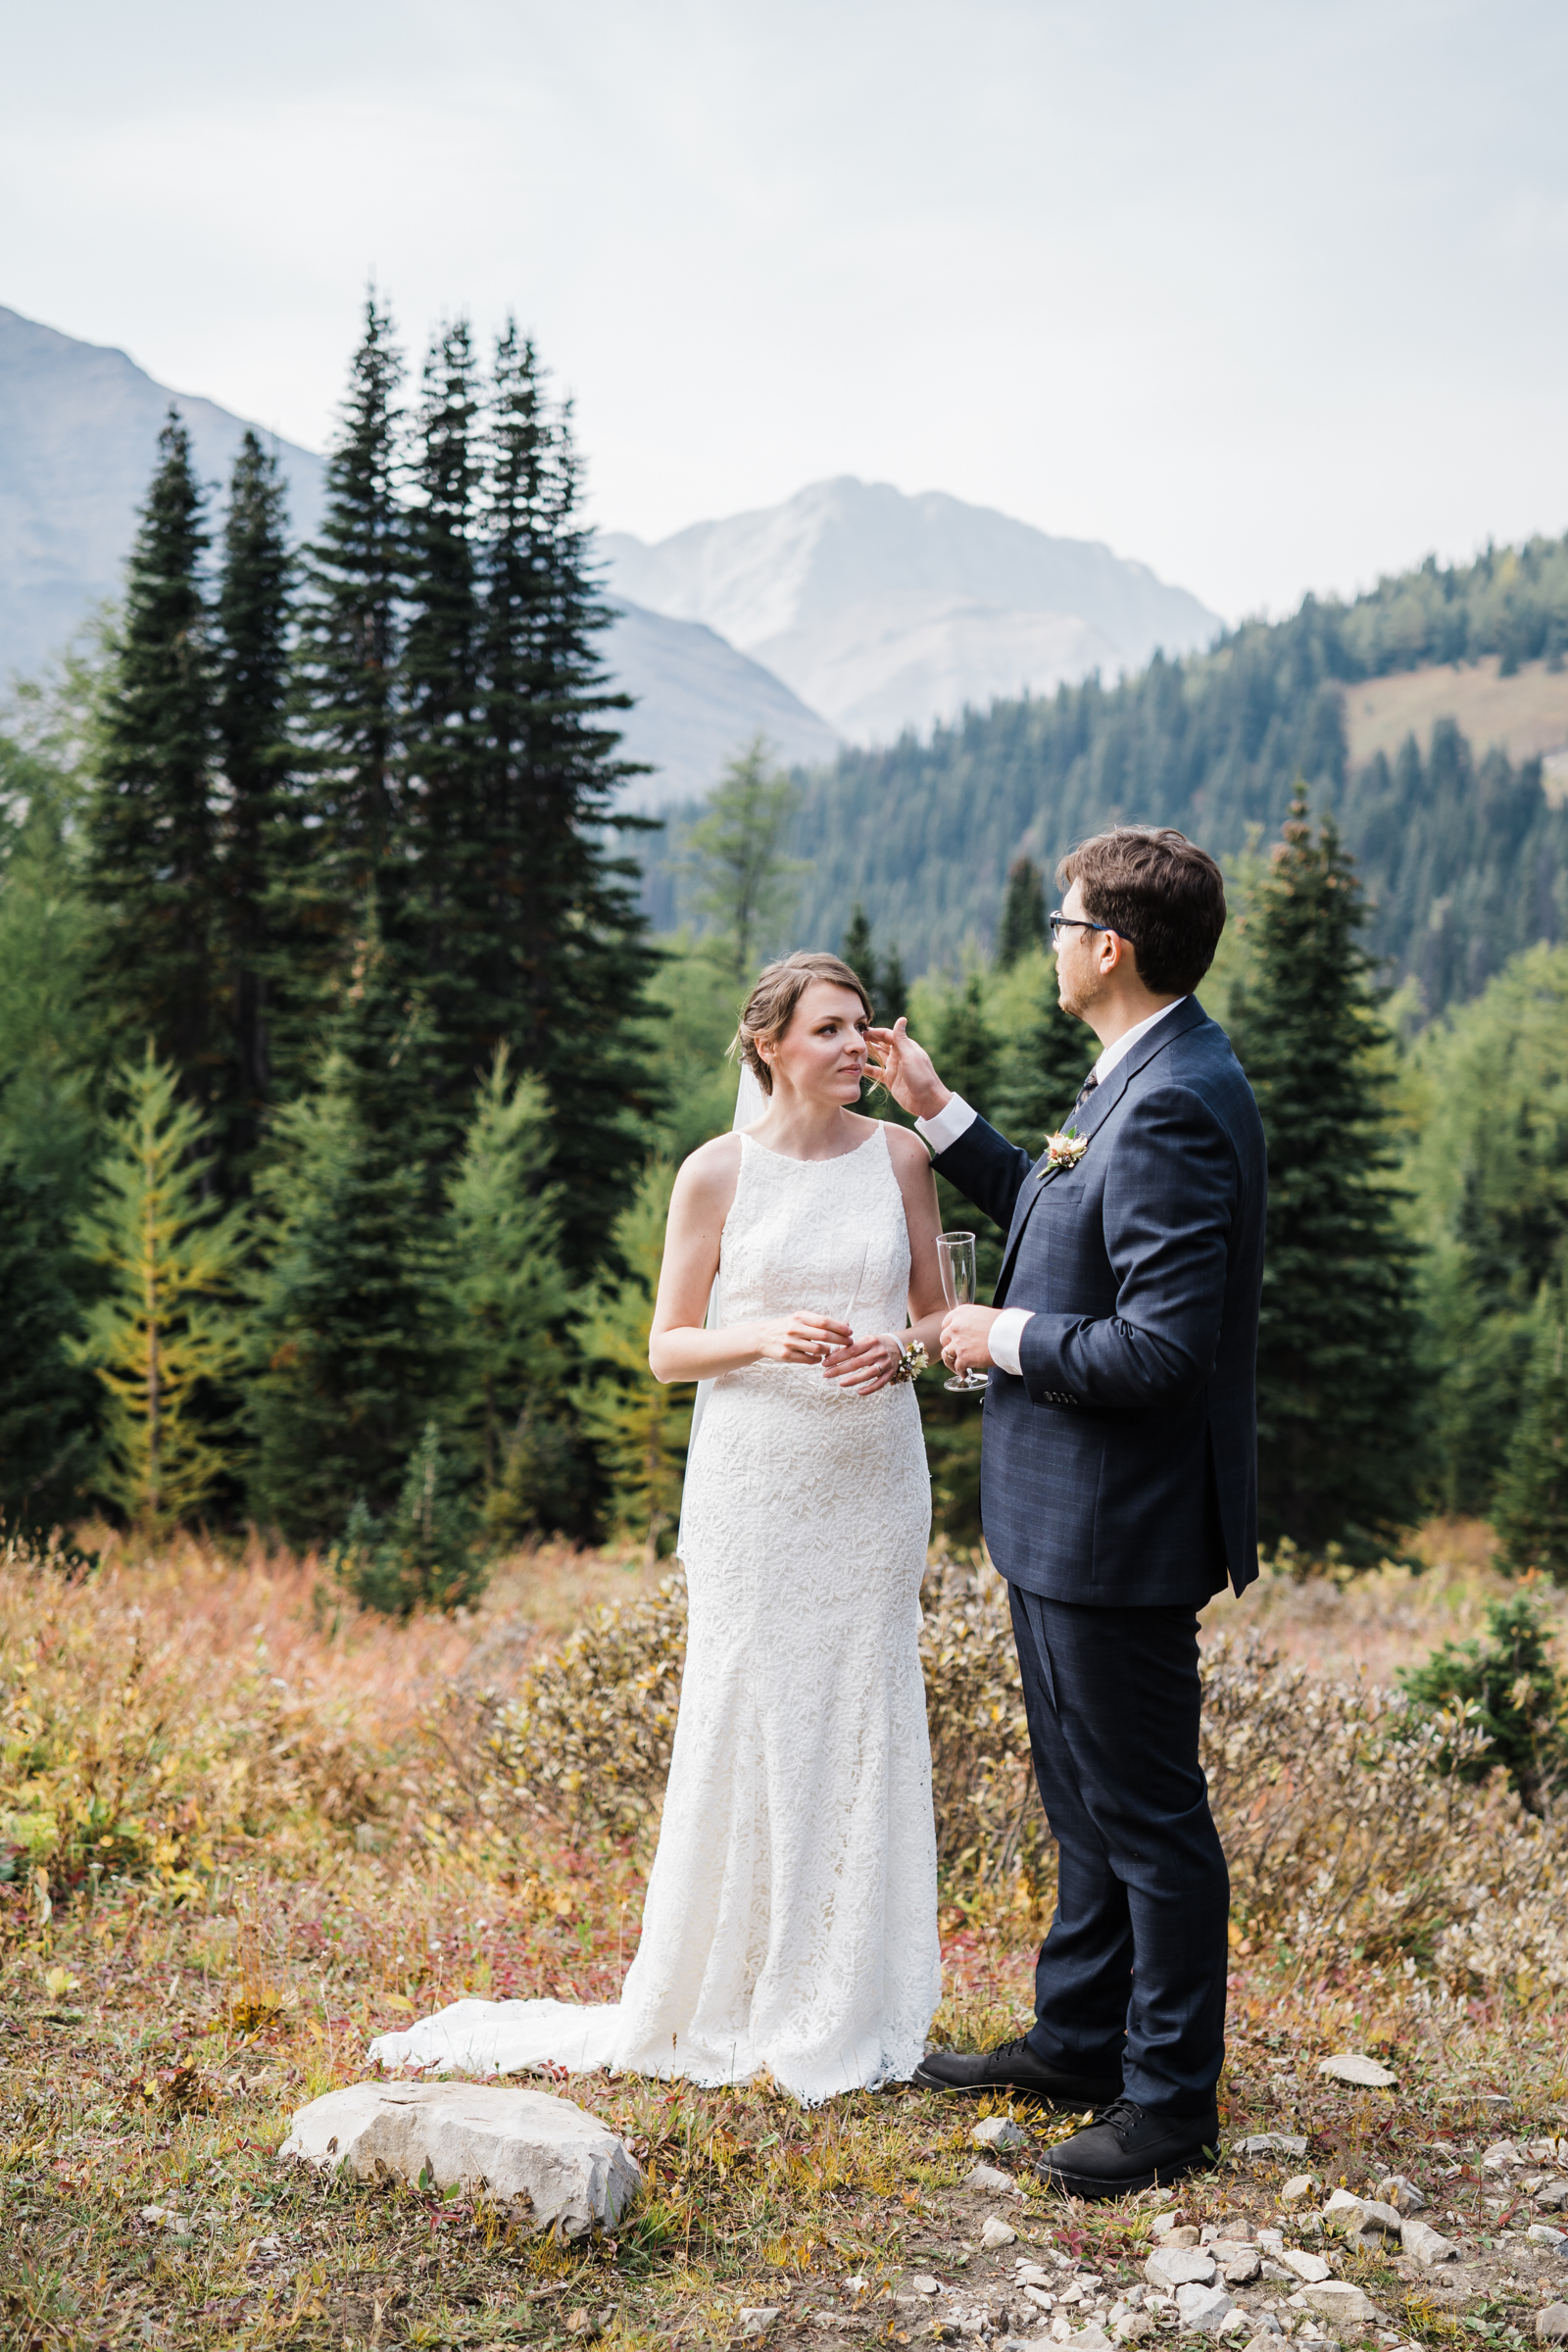 Groom brushes hair out of the brides face with the mountains in the background. 